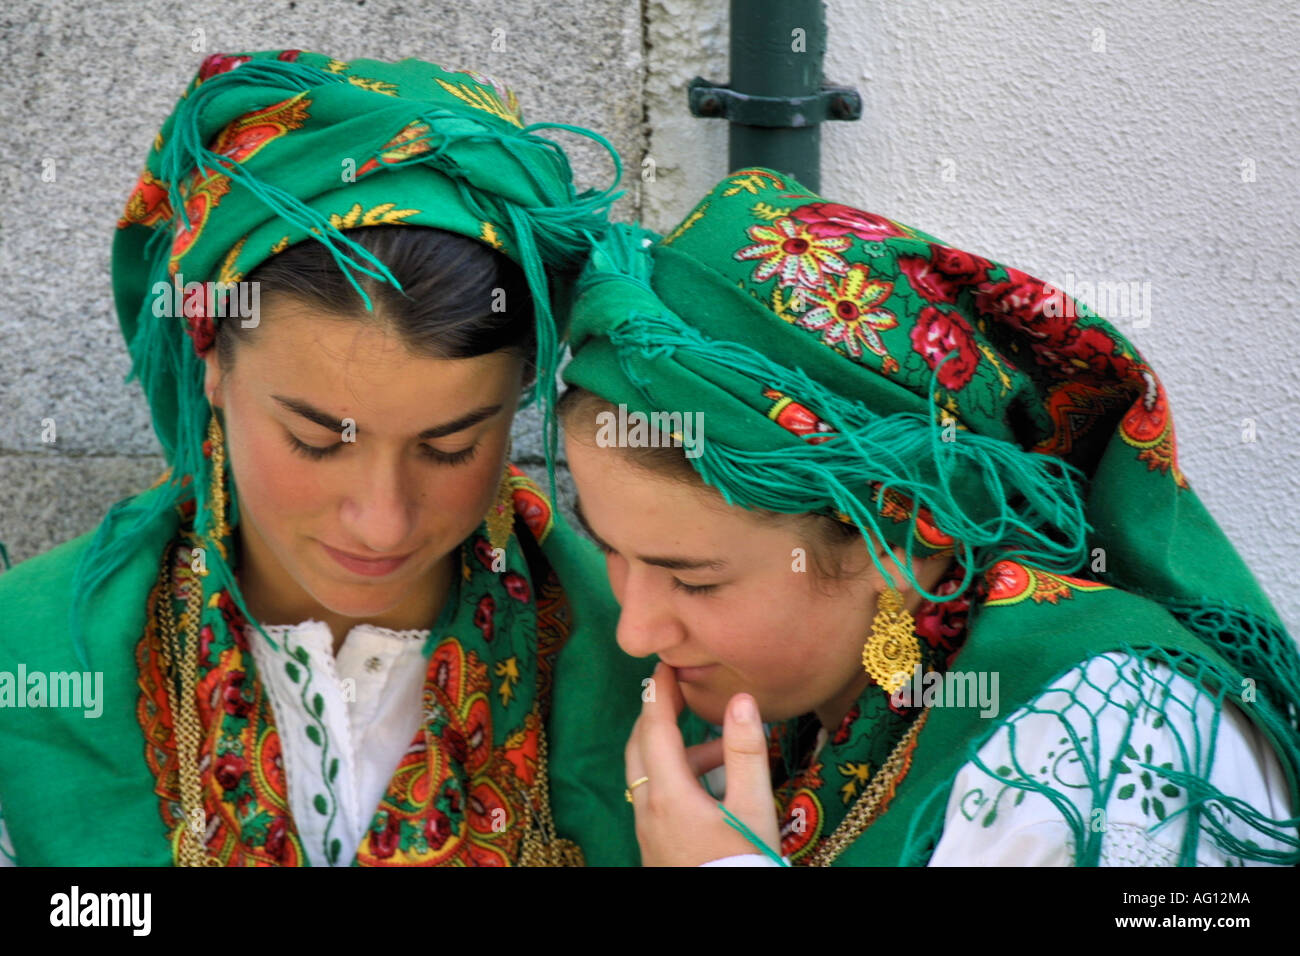 Portuguese girls in traditional dress from Minho province Stock Photo